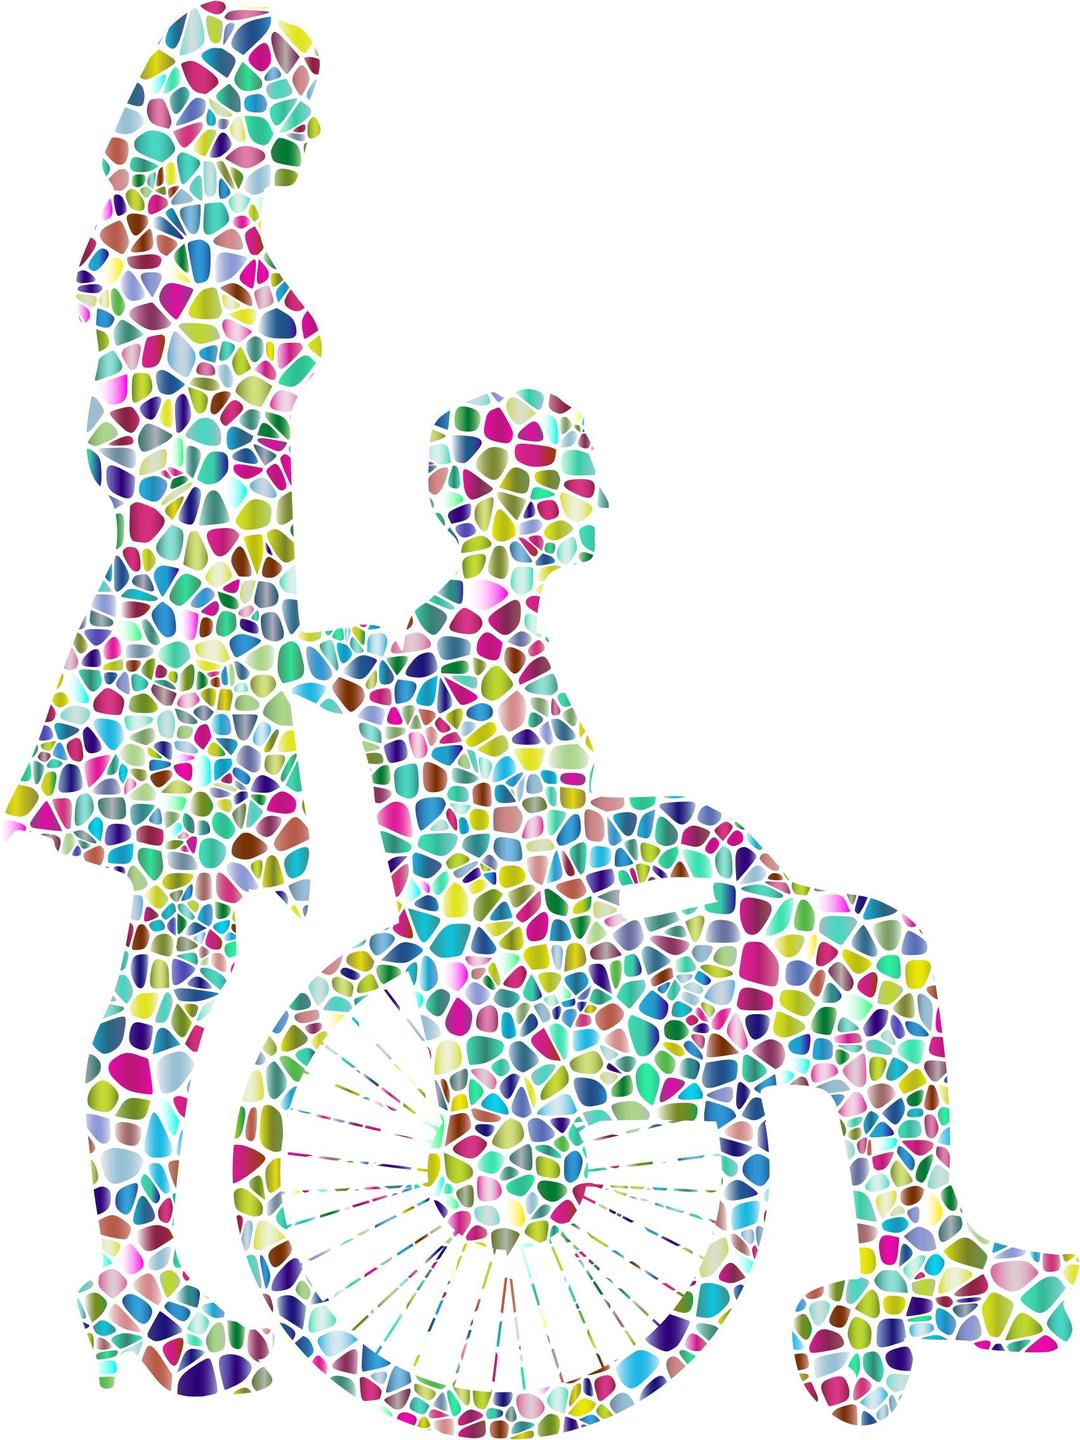 Polyprismatic Tiled Woman Pushing Man In Wheelchair Silhouette png transparent